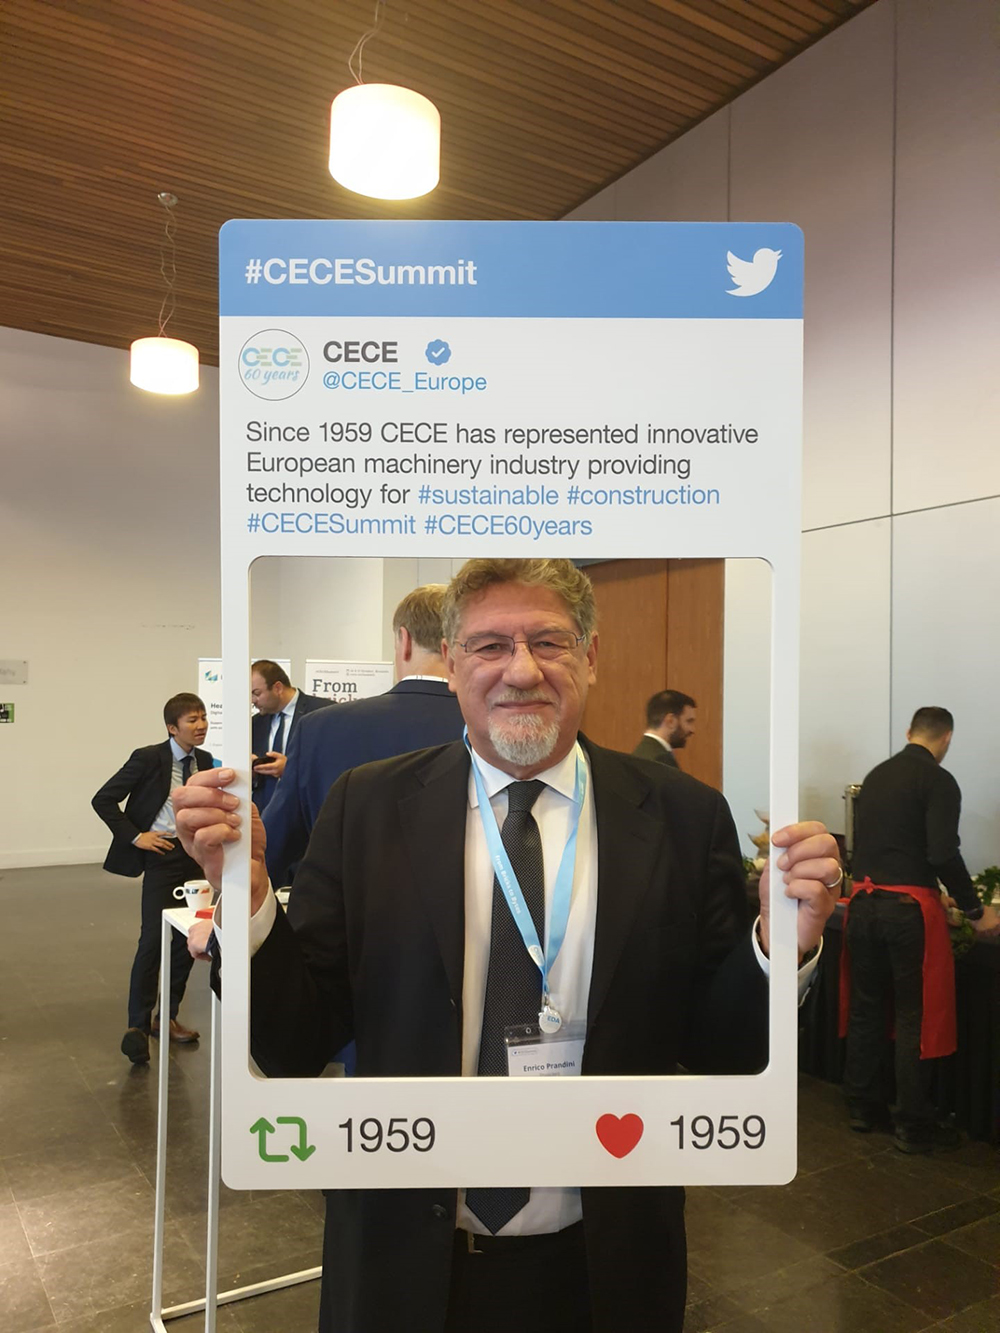 A real tweet for Enrico Prandini, president of CECE - Committee for European Construction Equipment